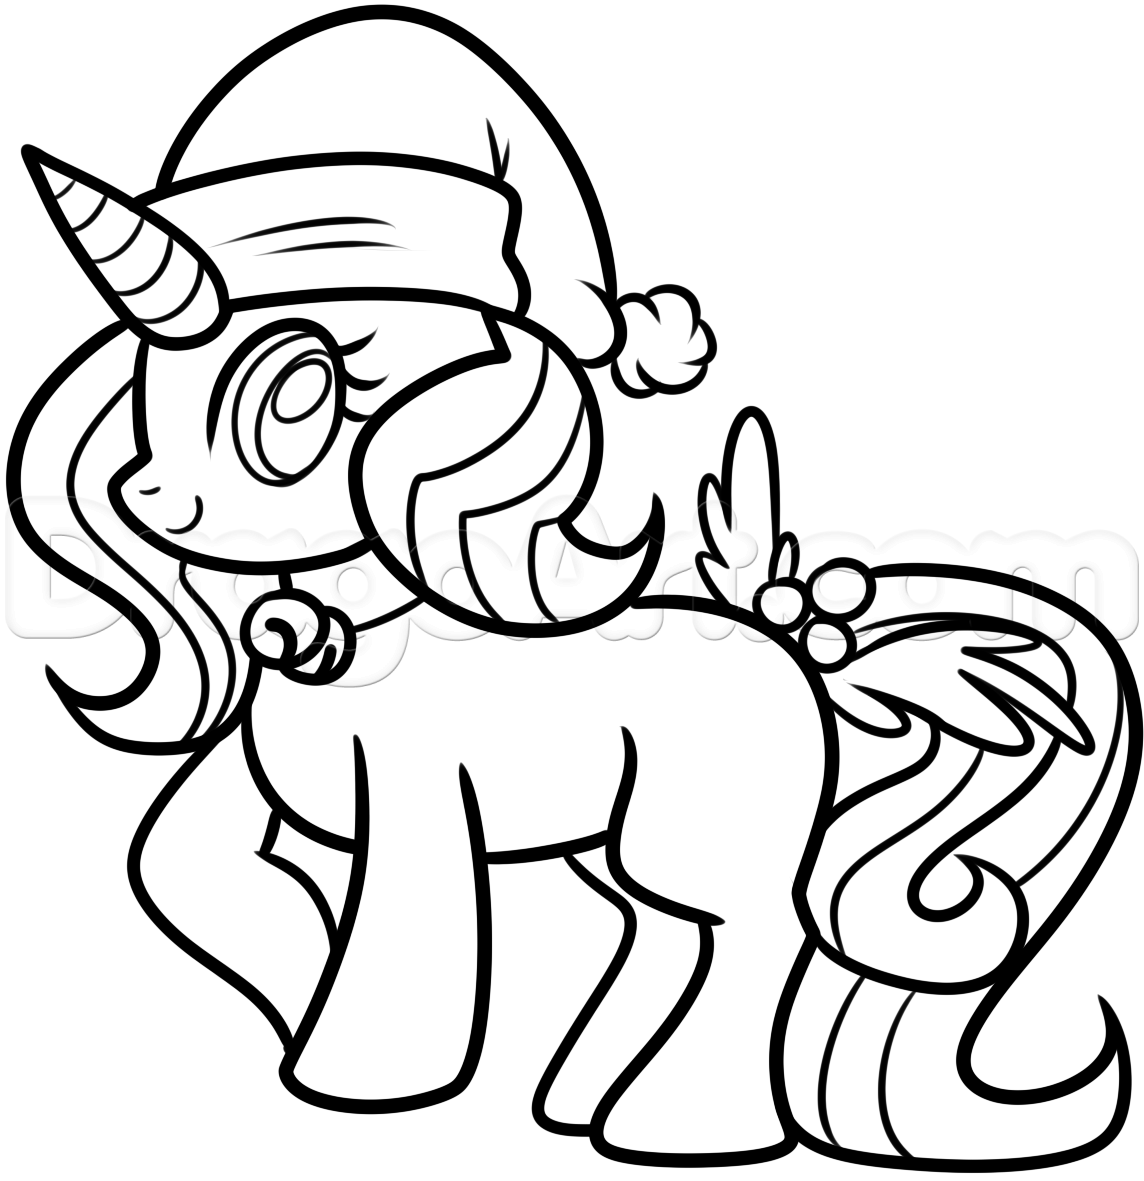 How to Draw a Christmas Unicorn, Step by Step, Christmas Stuff ...